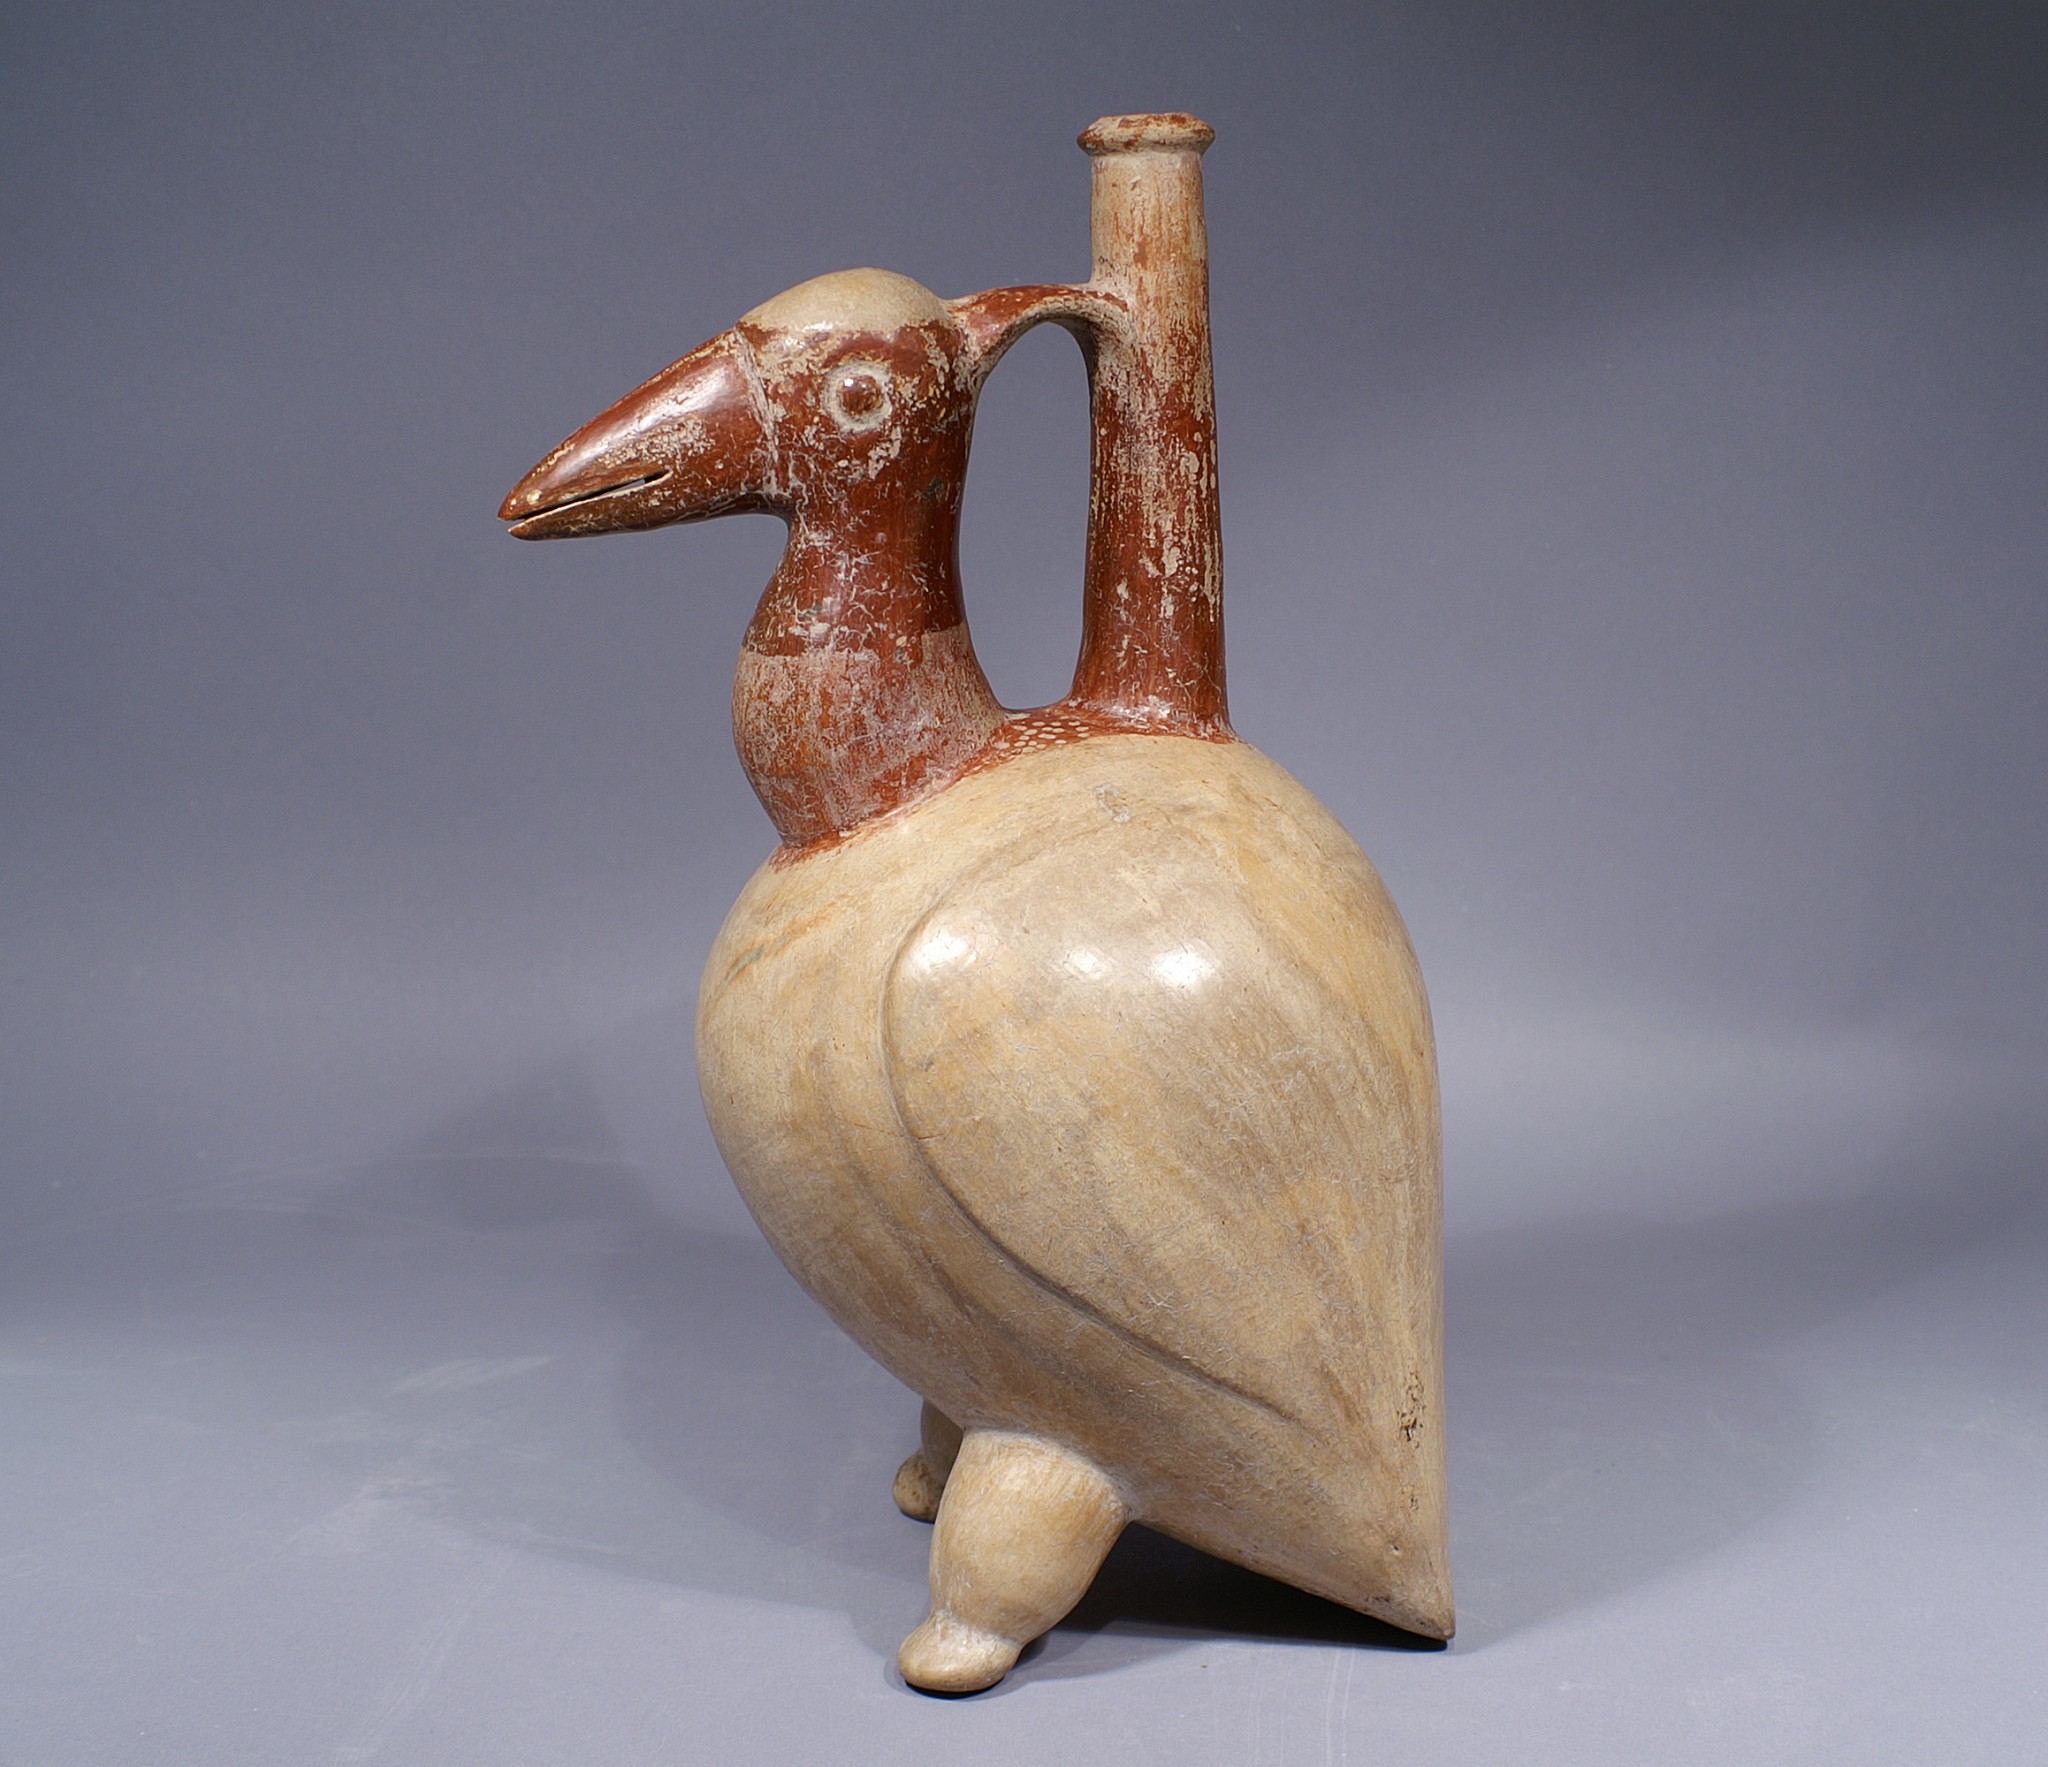 Ecuador, Chorrera Avian Effigy Spouted Vessel of a pelican
This effigy vessel represents a pelican decorated with red-brown slip on the head and neck over a buff body. The wings are softly modeled at the sides of the body, while the tail and quasi human feet support the vessel in a vertical position. Anthropomorphic effigy bottles with tall spouts are one of the hallmarks of Chorrera art, and may have been for high-status beverages for chiefs and shamans, probably alcoholic brews laced with hallucinogenic ingredients. They were also placed in tombs as offerings for the dead. The characteristic tall spout was almost certainly for the manipulation of liquid, and its slender height would have prevented spillage. A nearly identical vessel is published in Klein and Cevallos, eds., "Ecuador: The Secret Art of Precolumbian Ecuador" (2007: pl. 46). This pelican is slightly taller at 13 3/4" inches, and his head is turned 90 degrees, but the artist painted the head and feet in the same red-brown over a buff body with modeled wings.
Media: Ceramic
Dimensions: Height 12 1/2"
$14,000
94295